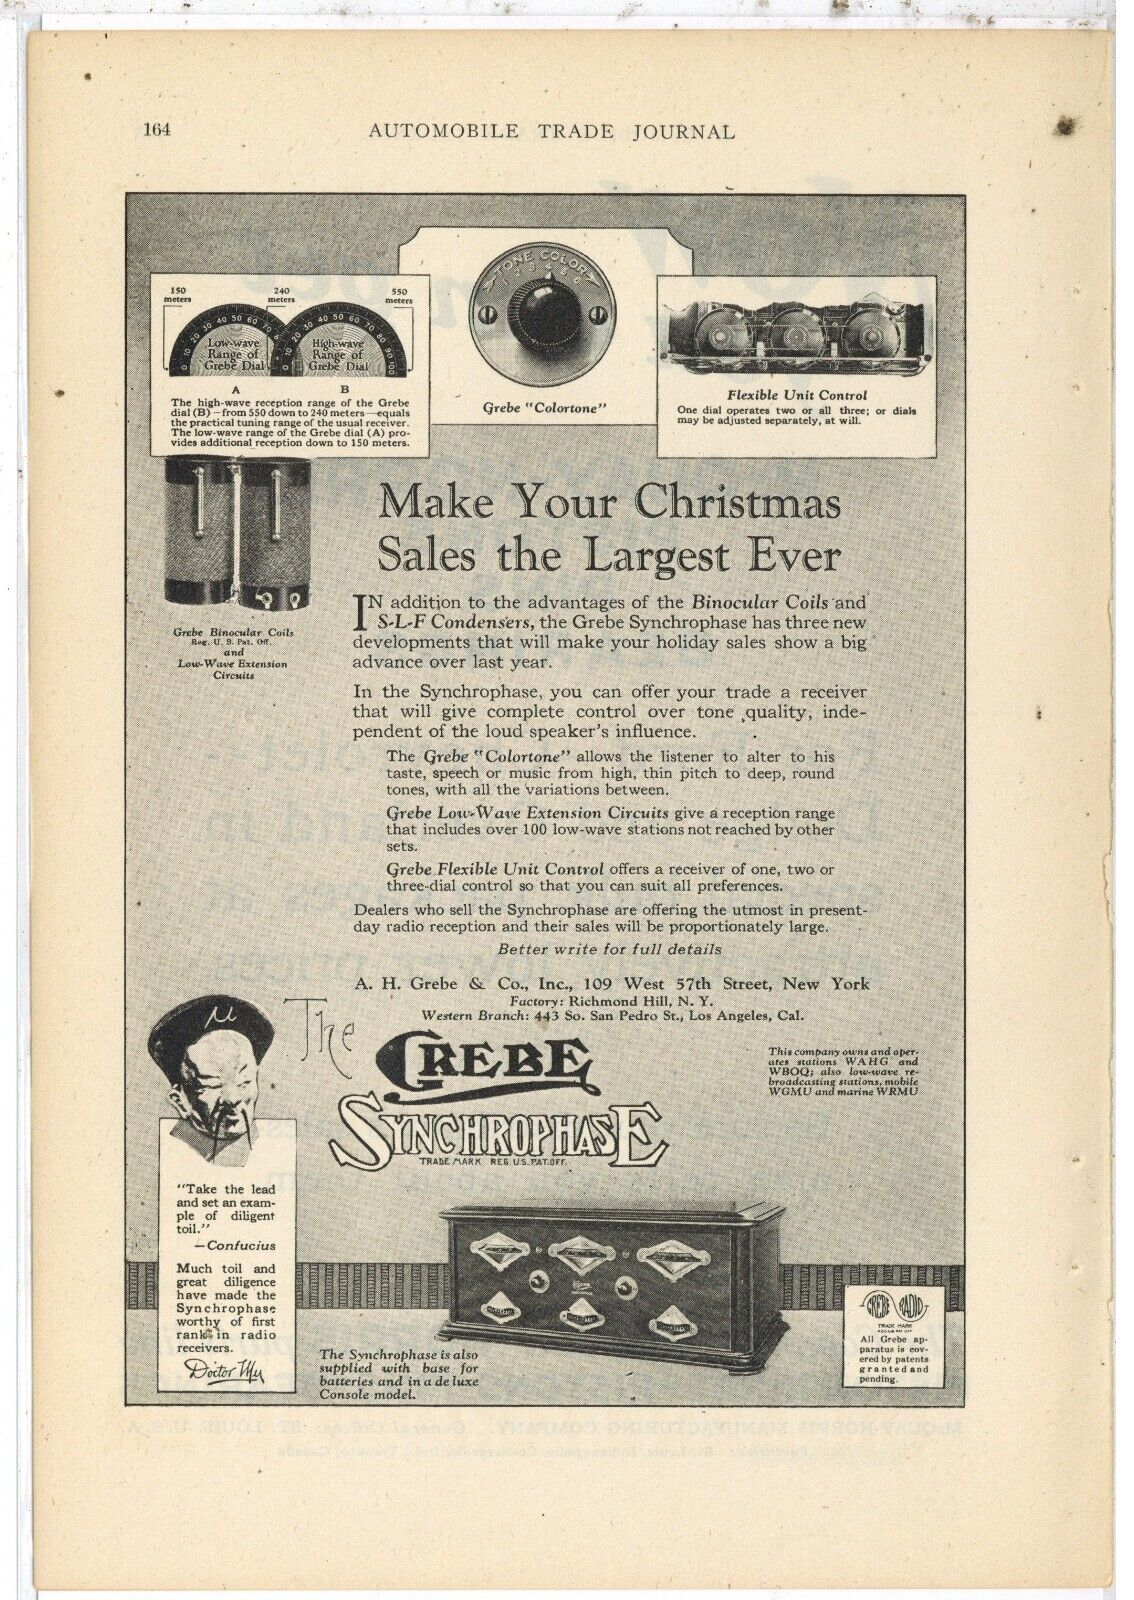 1926 A.H. Grebe & Co. Ad: Grebe Synchrophase Radios, Closeup of Features, Knobs